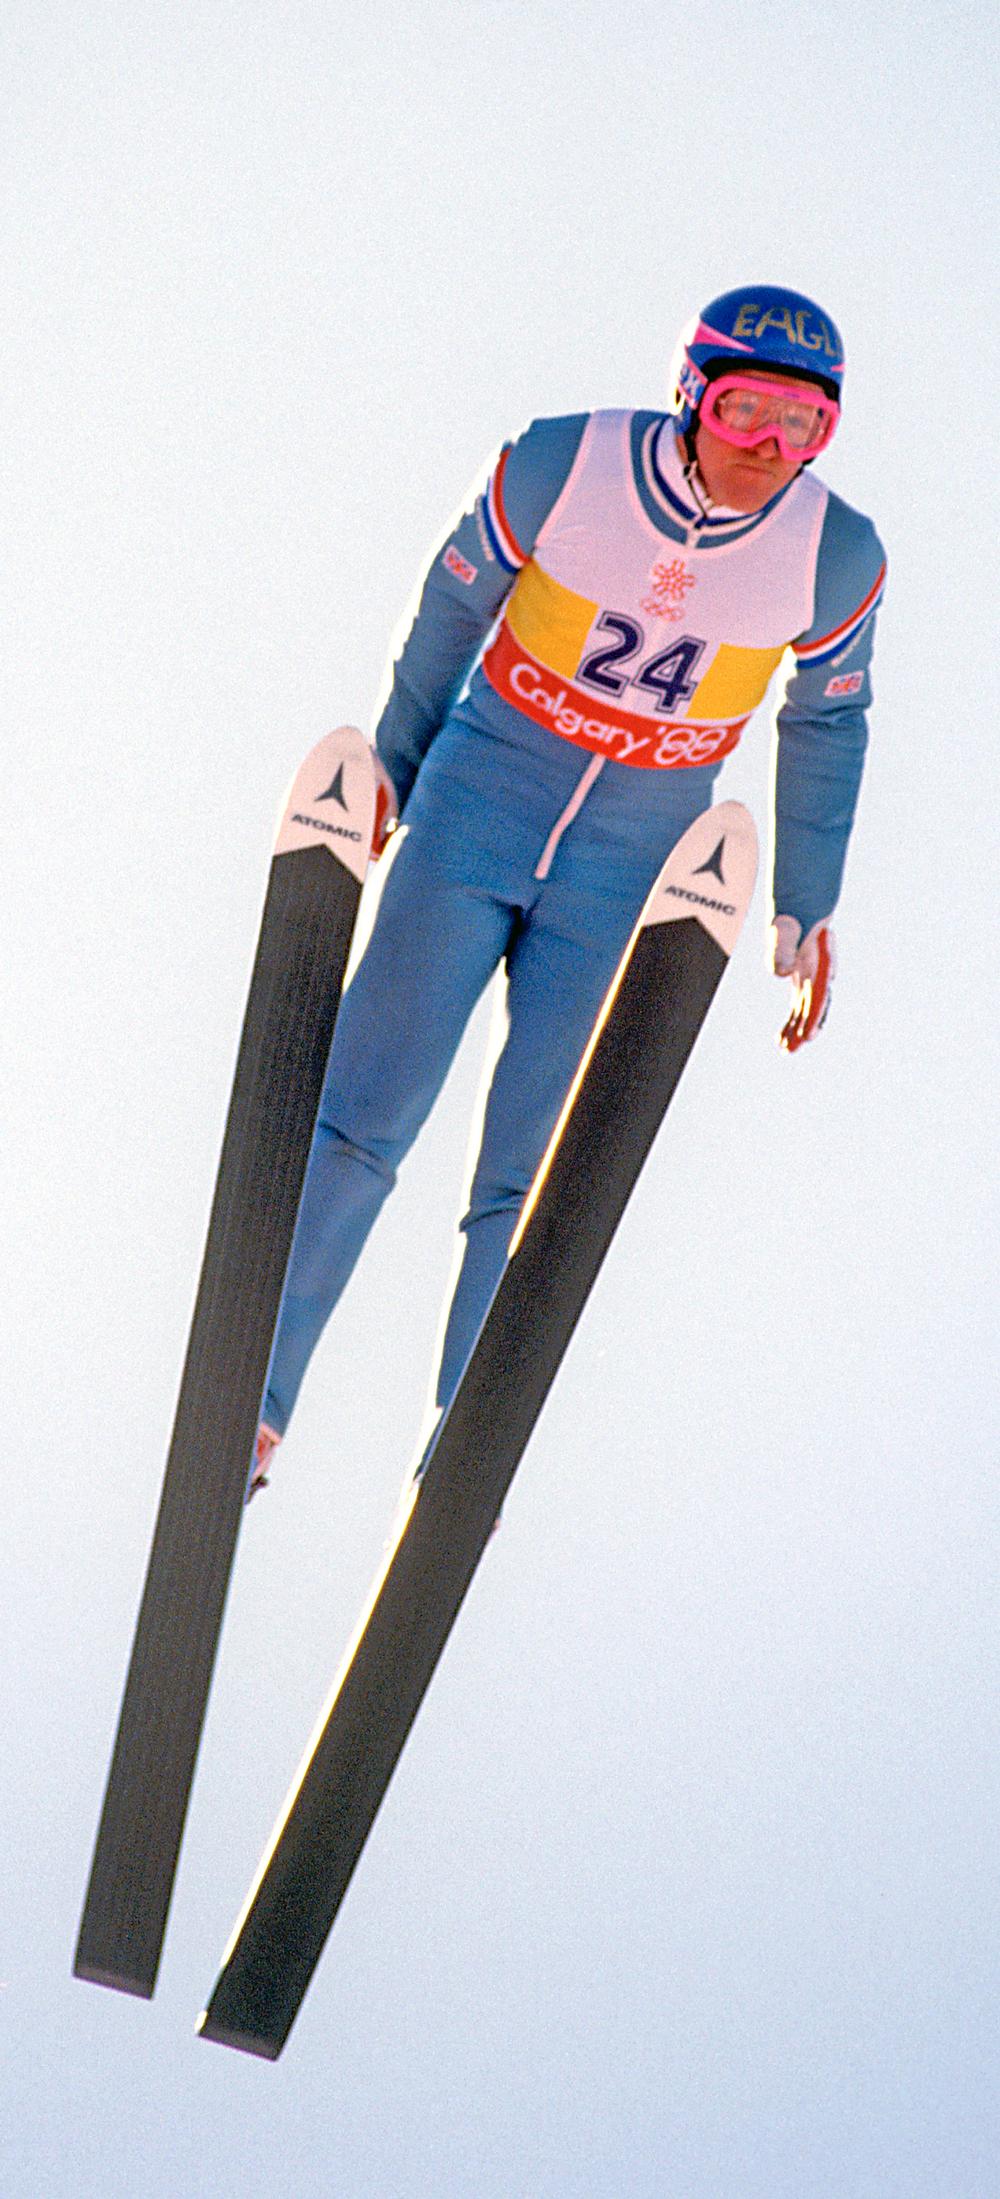 Edwards in action at the 1988 Winter Olympics – his life has inspired a Hollywood film